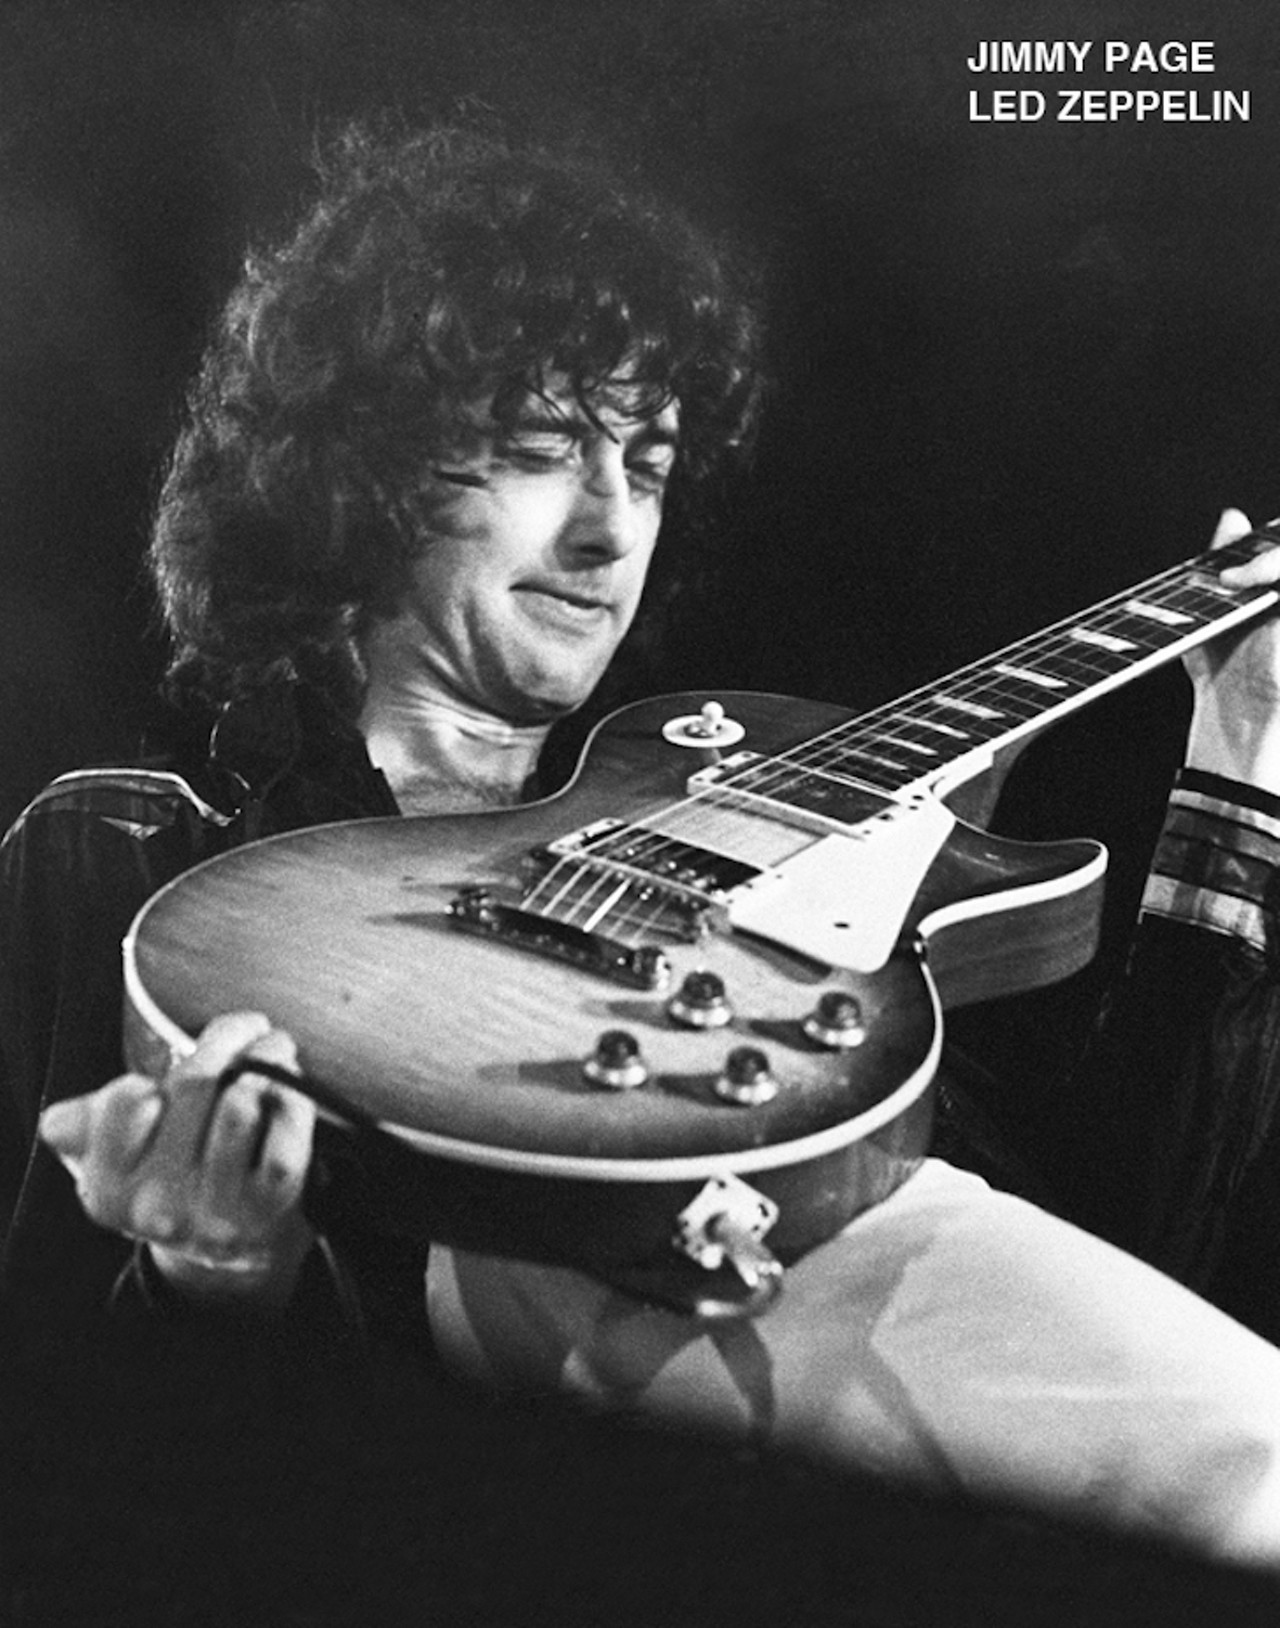 Jimmy Page - Led Zeppelin - May 6, 1973 - Tampa Stadium